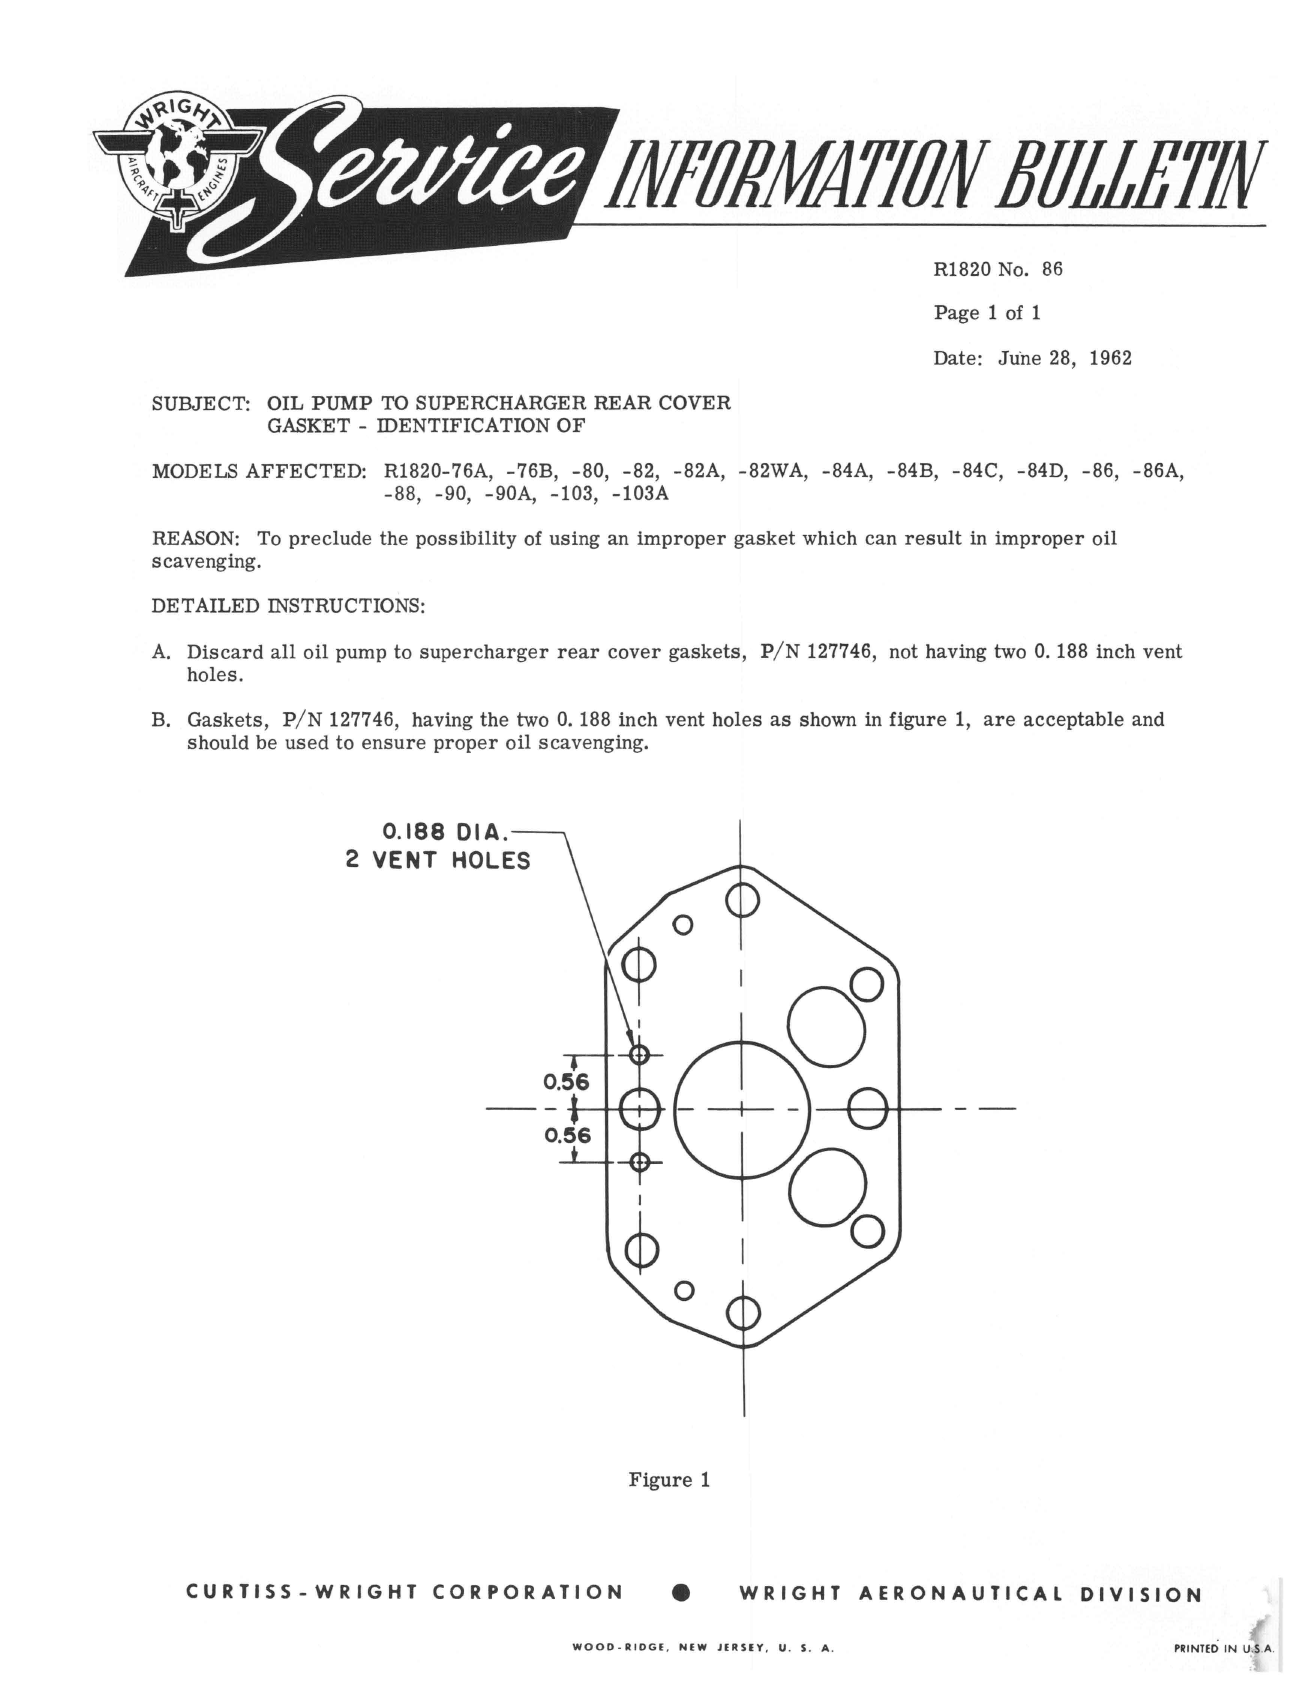 Sample page 1 from AirCorps Library document: Identification of Oil Pump to Supercharger Rear Cover Gasket